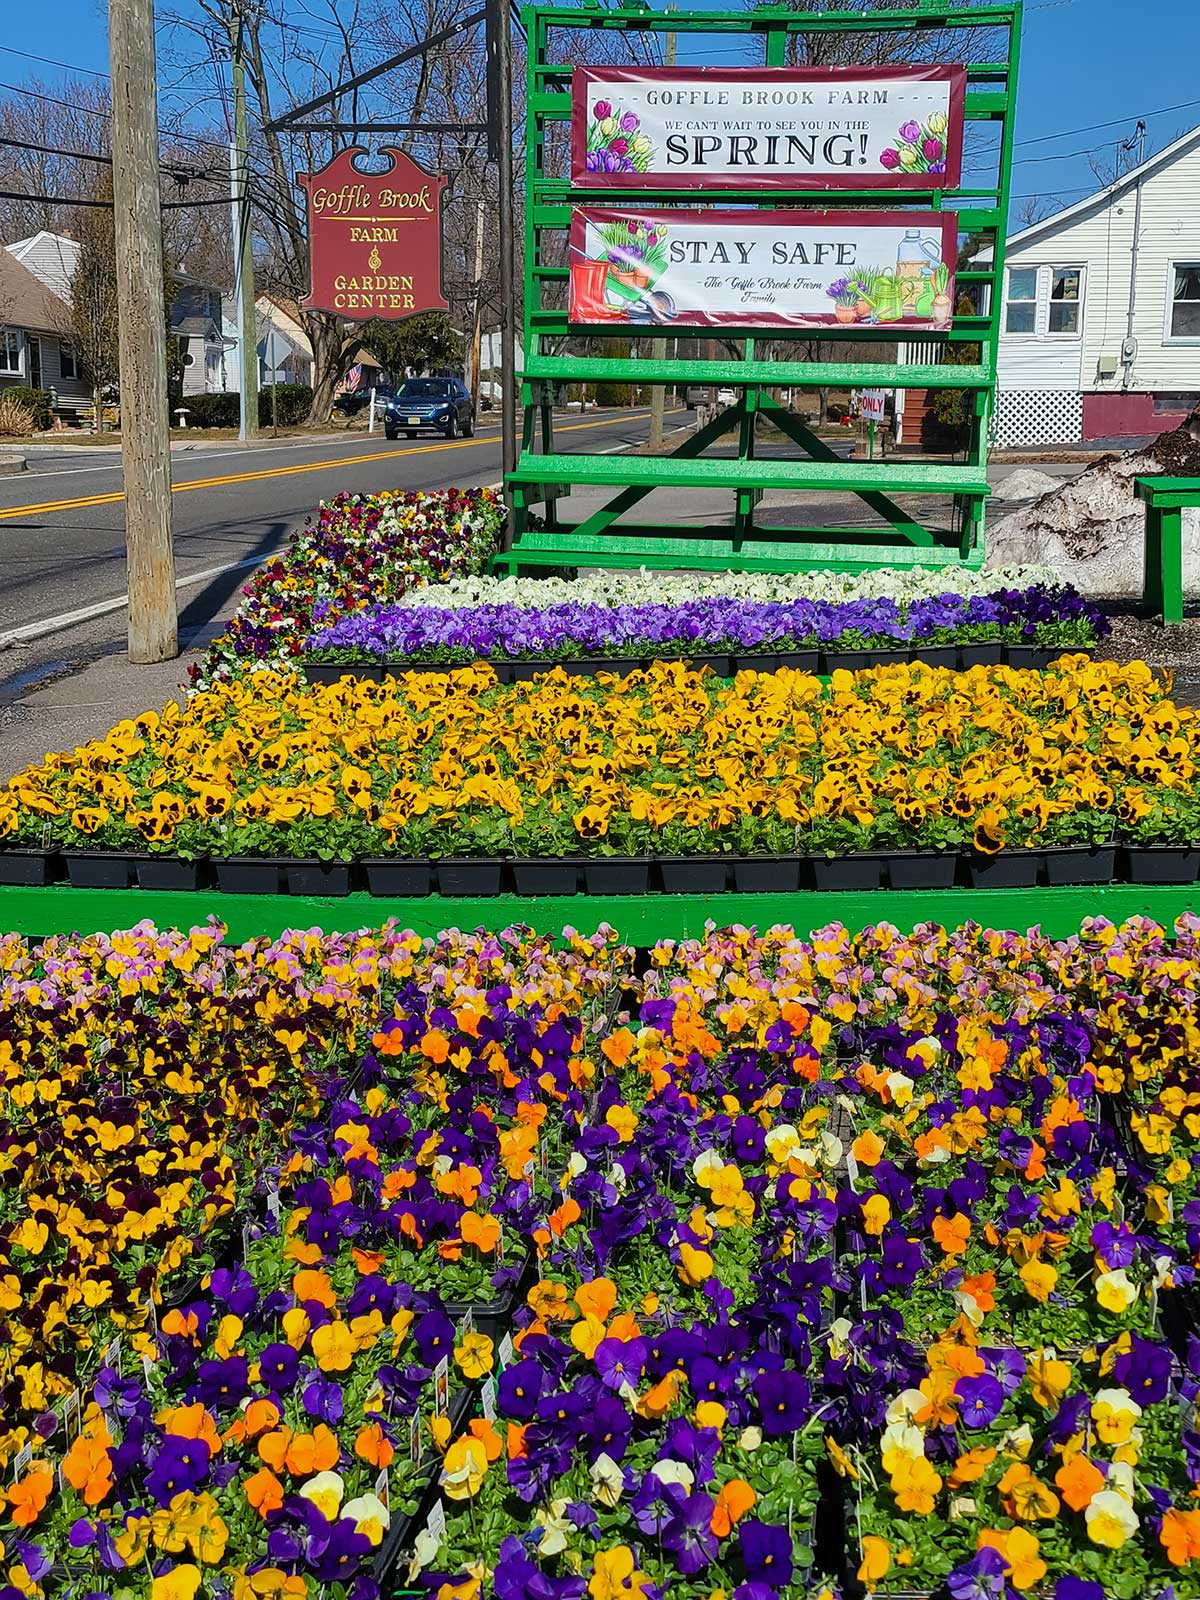 When the pansies align Goffle Brook Road, spring has sprung. Gardeners know this in their hearts, even though the calendar may say otherwise. There is something about this beguiling springtime flower that sets the emotions astir and reassures those who have been waiting through the long winter that the new season has arrived. 